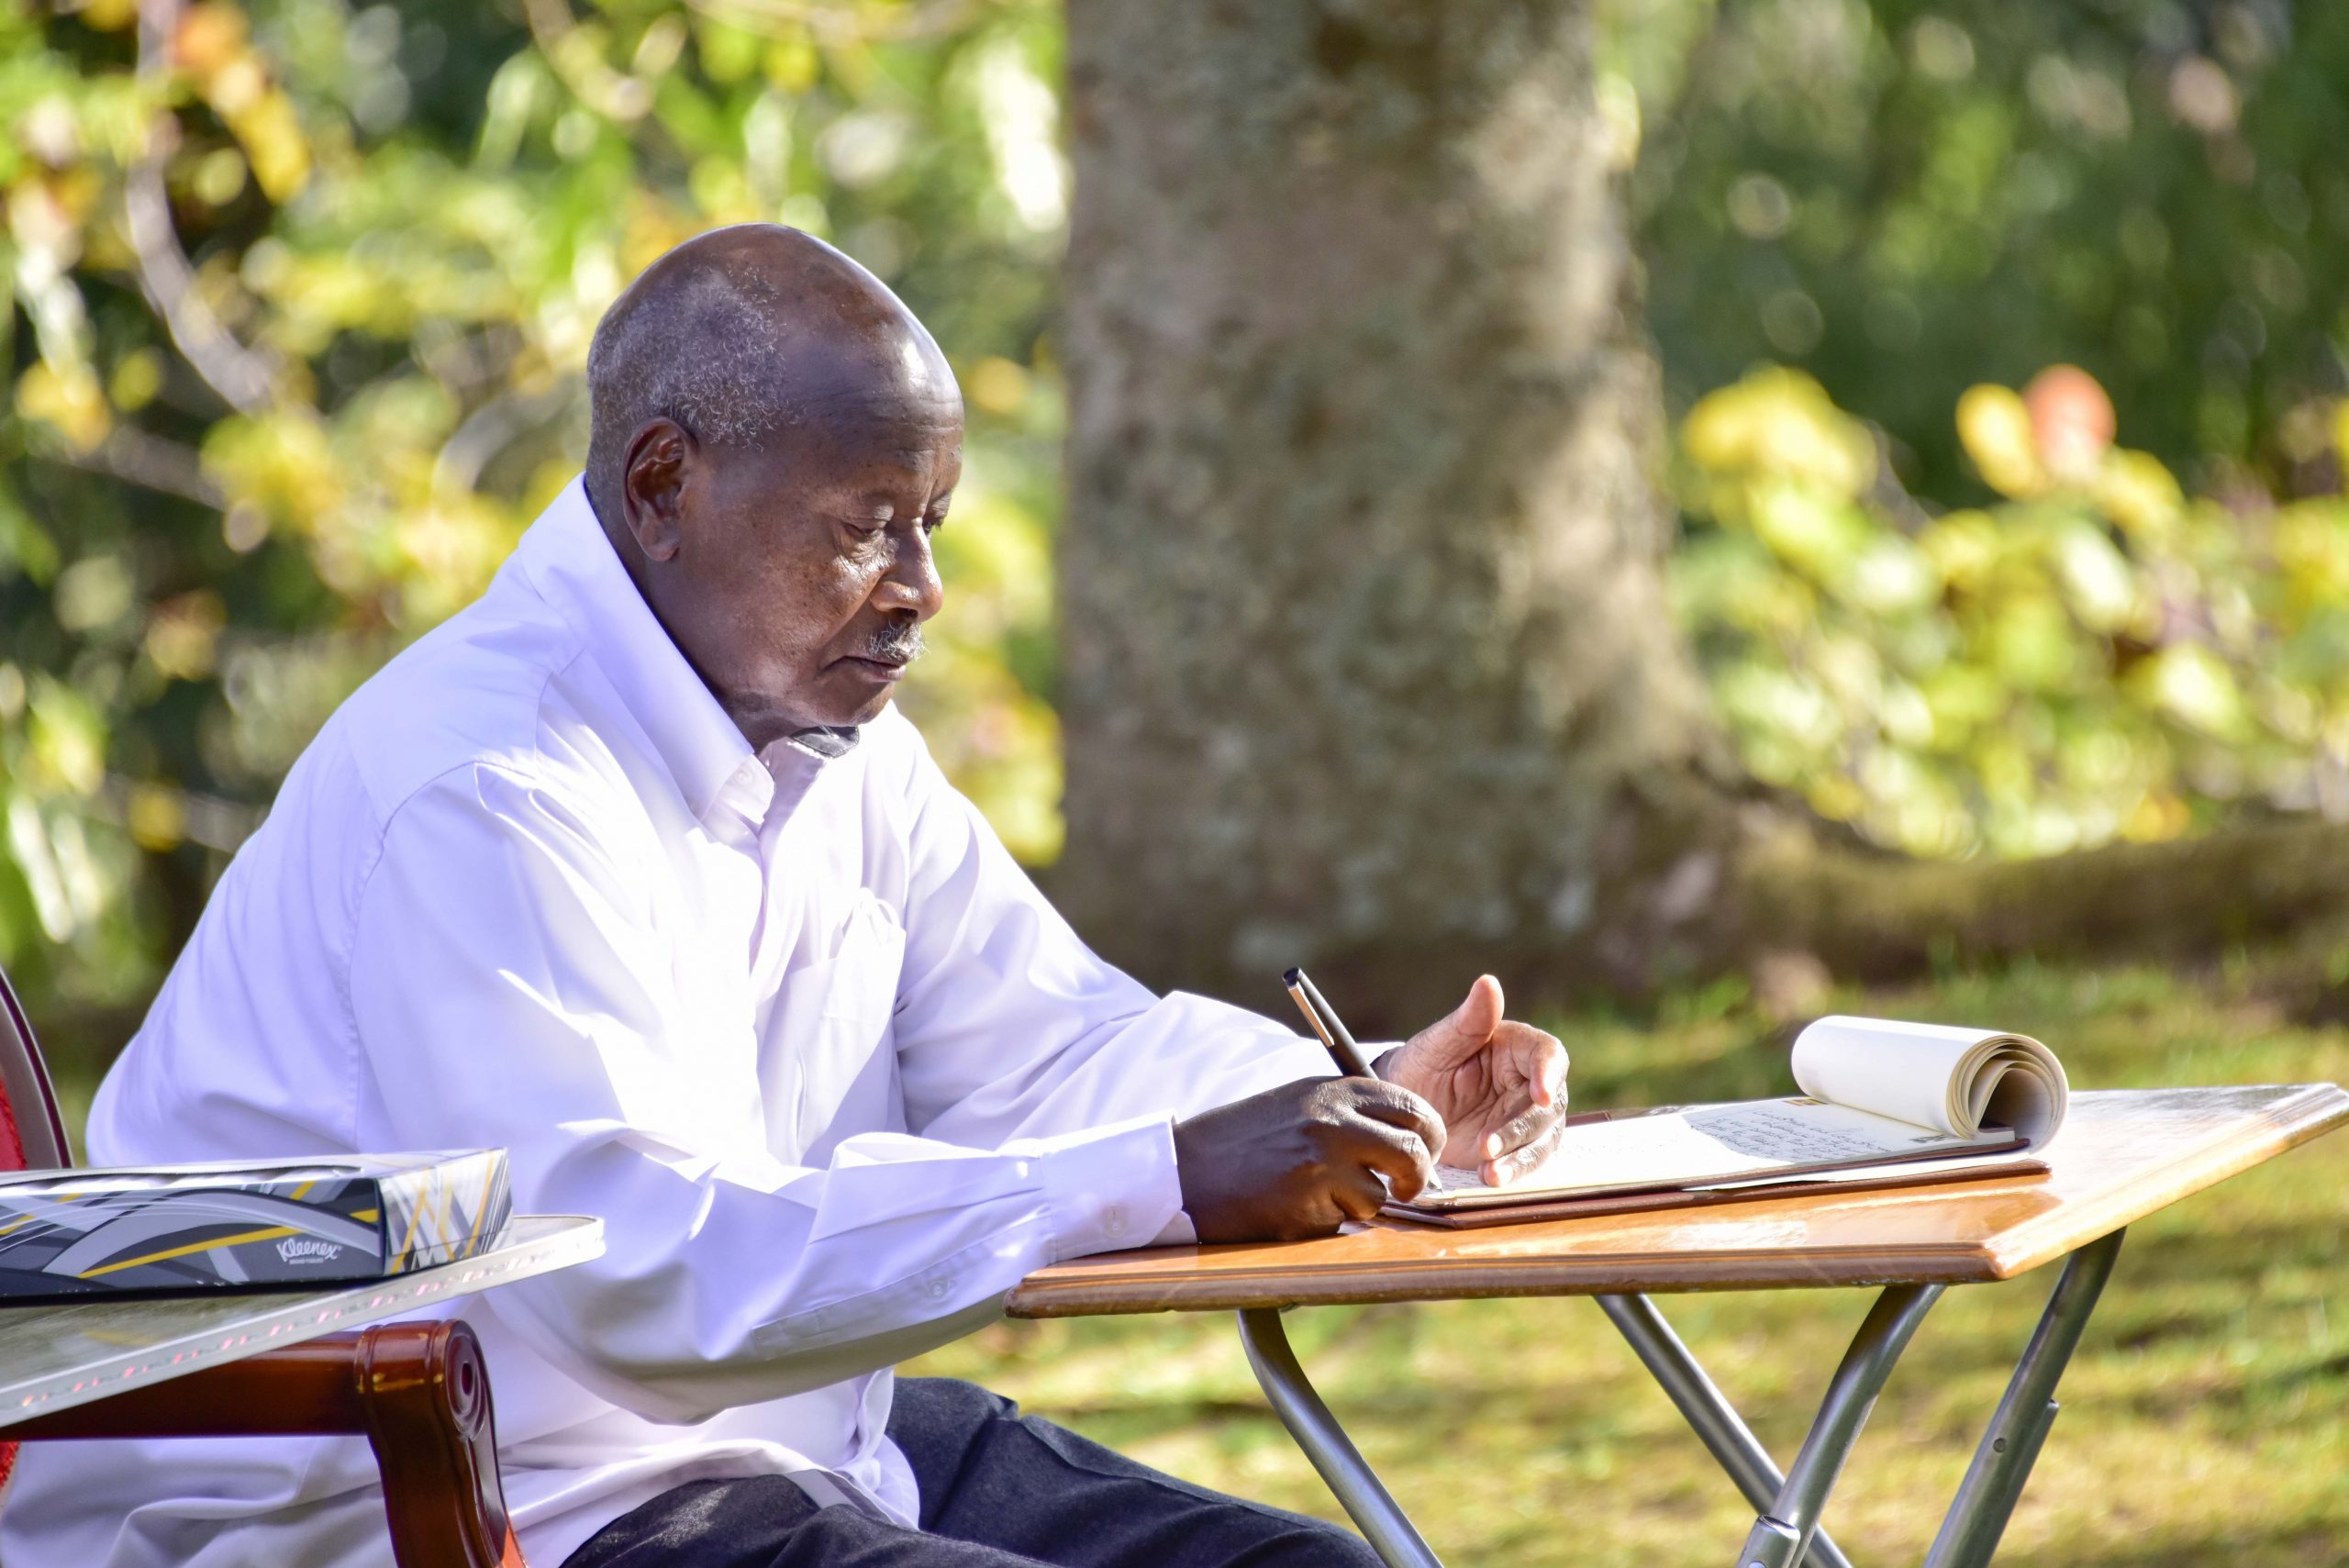 Mbale disaster: Museveni issues strict directives against environmental degradation